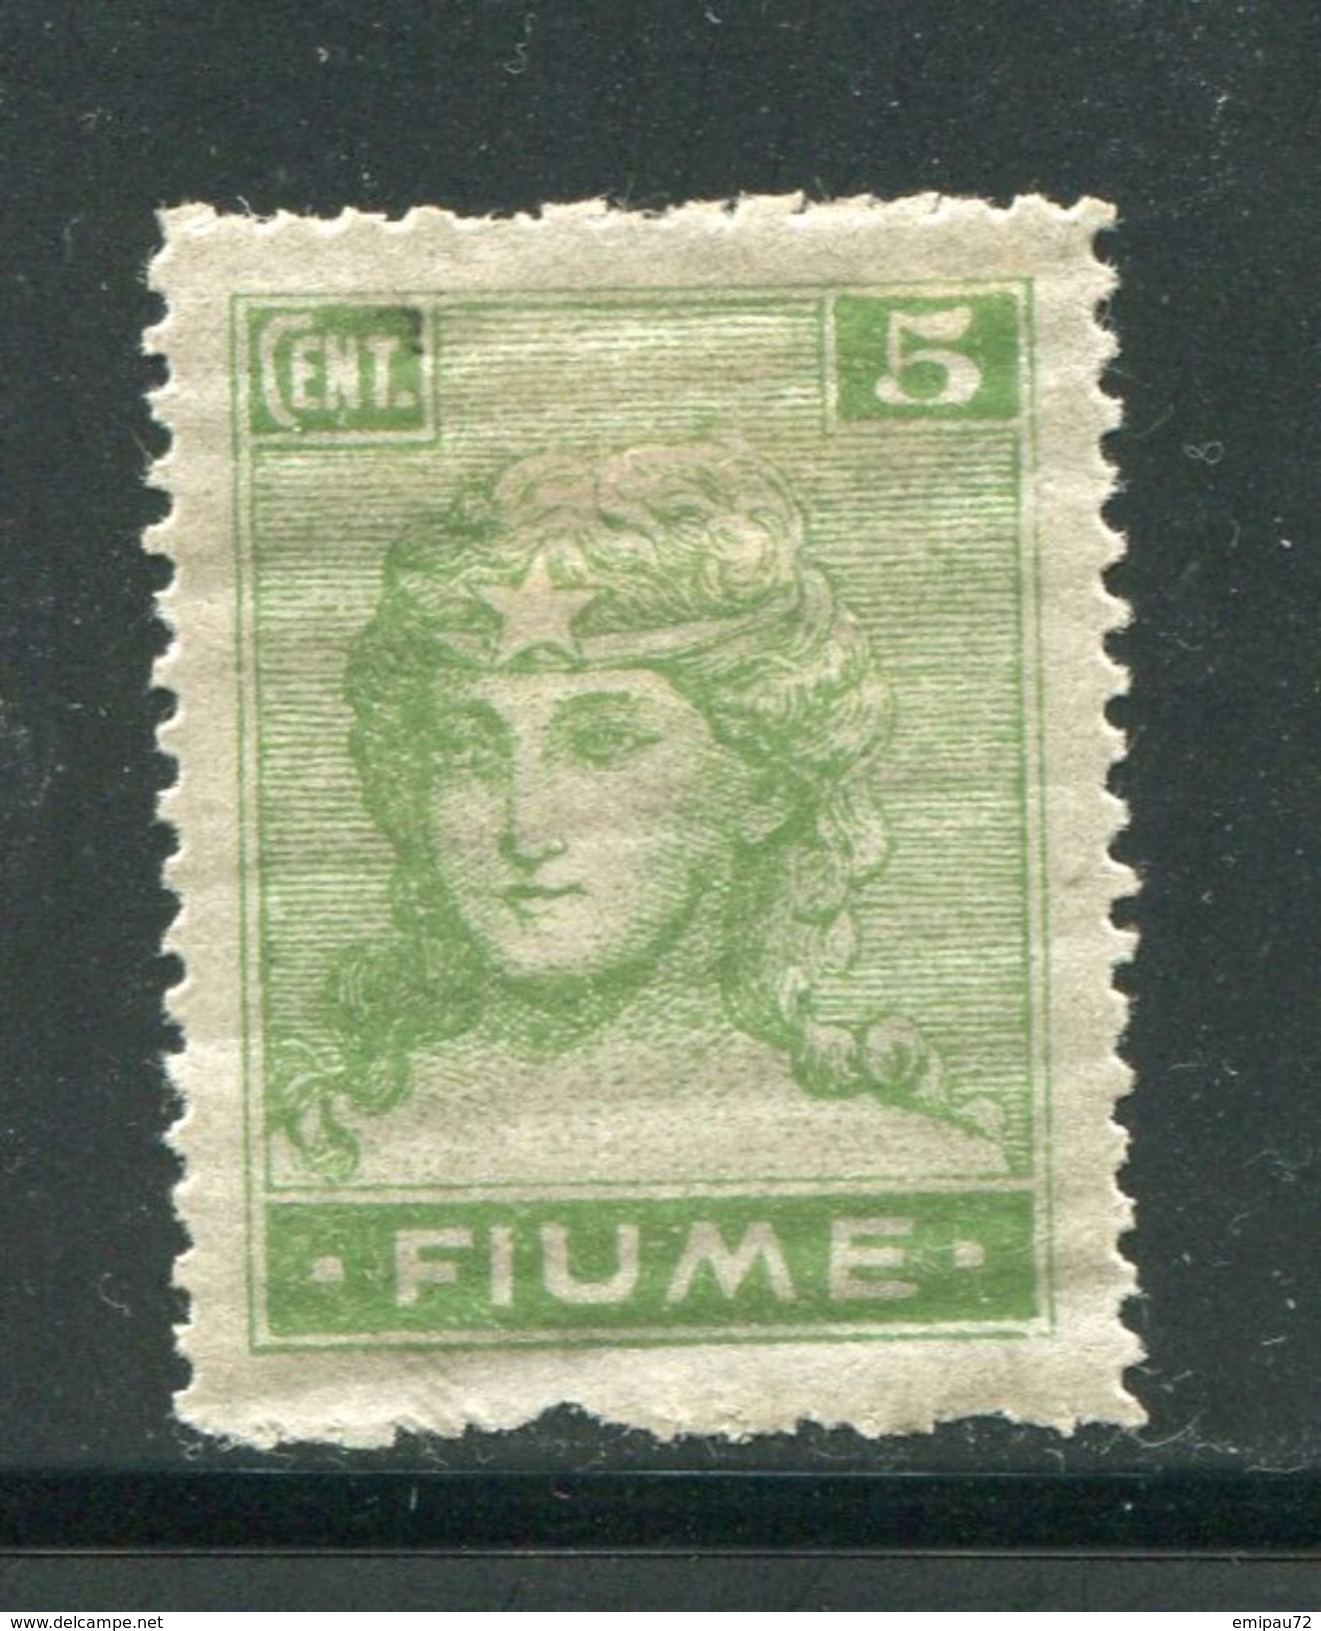 ITALIE- FIUME- Y&T N°34- Neuf Avec Charnière * - Occup. Iugoslava: Fiume